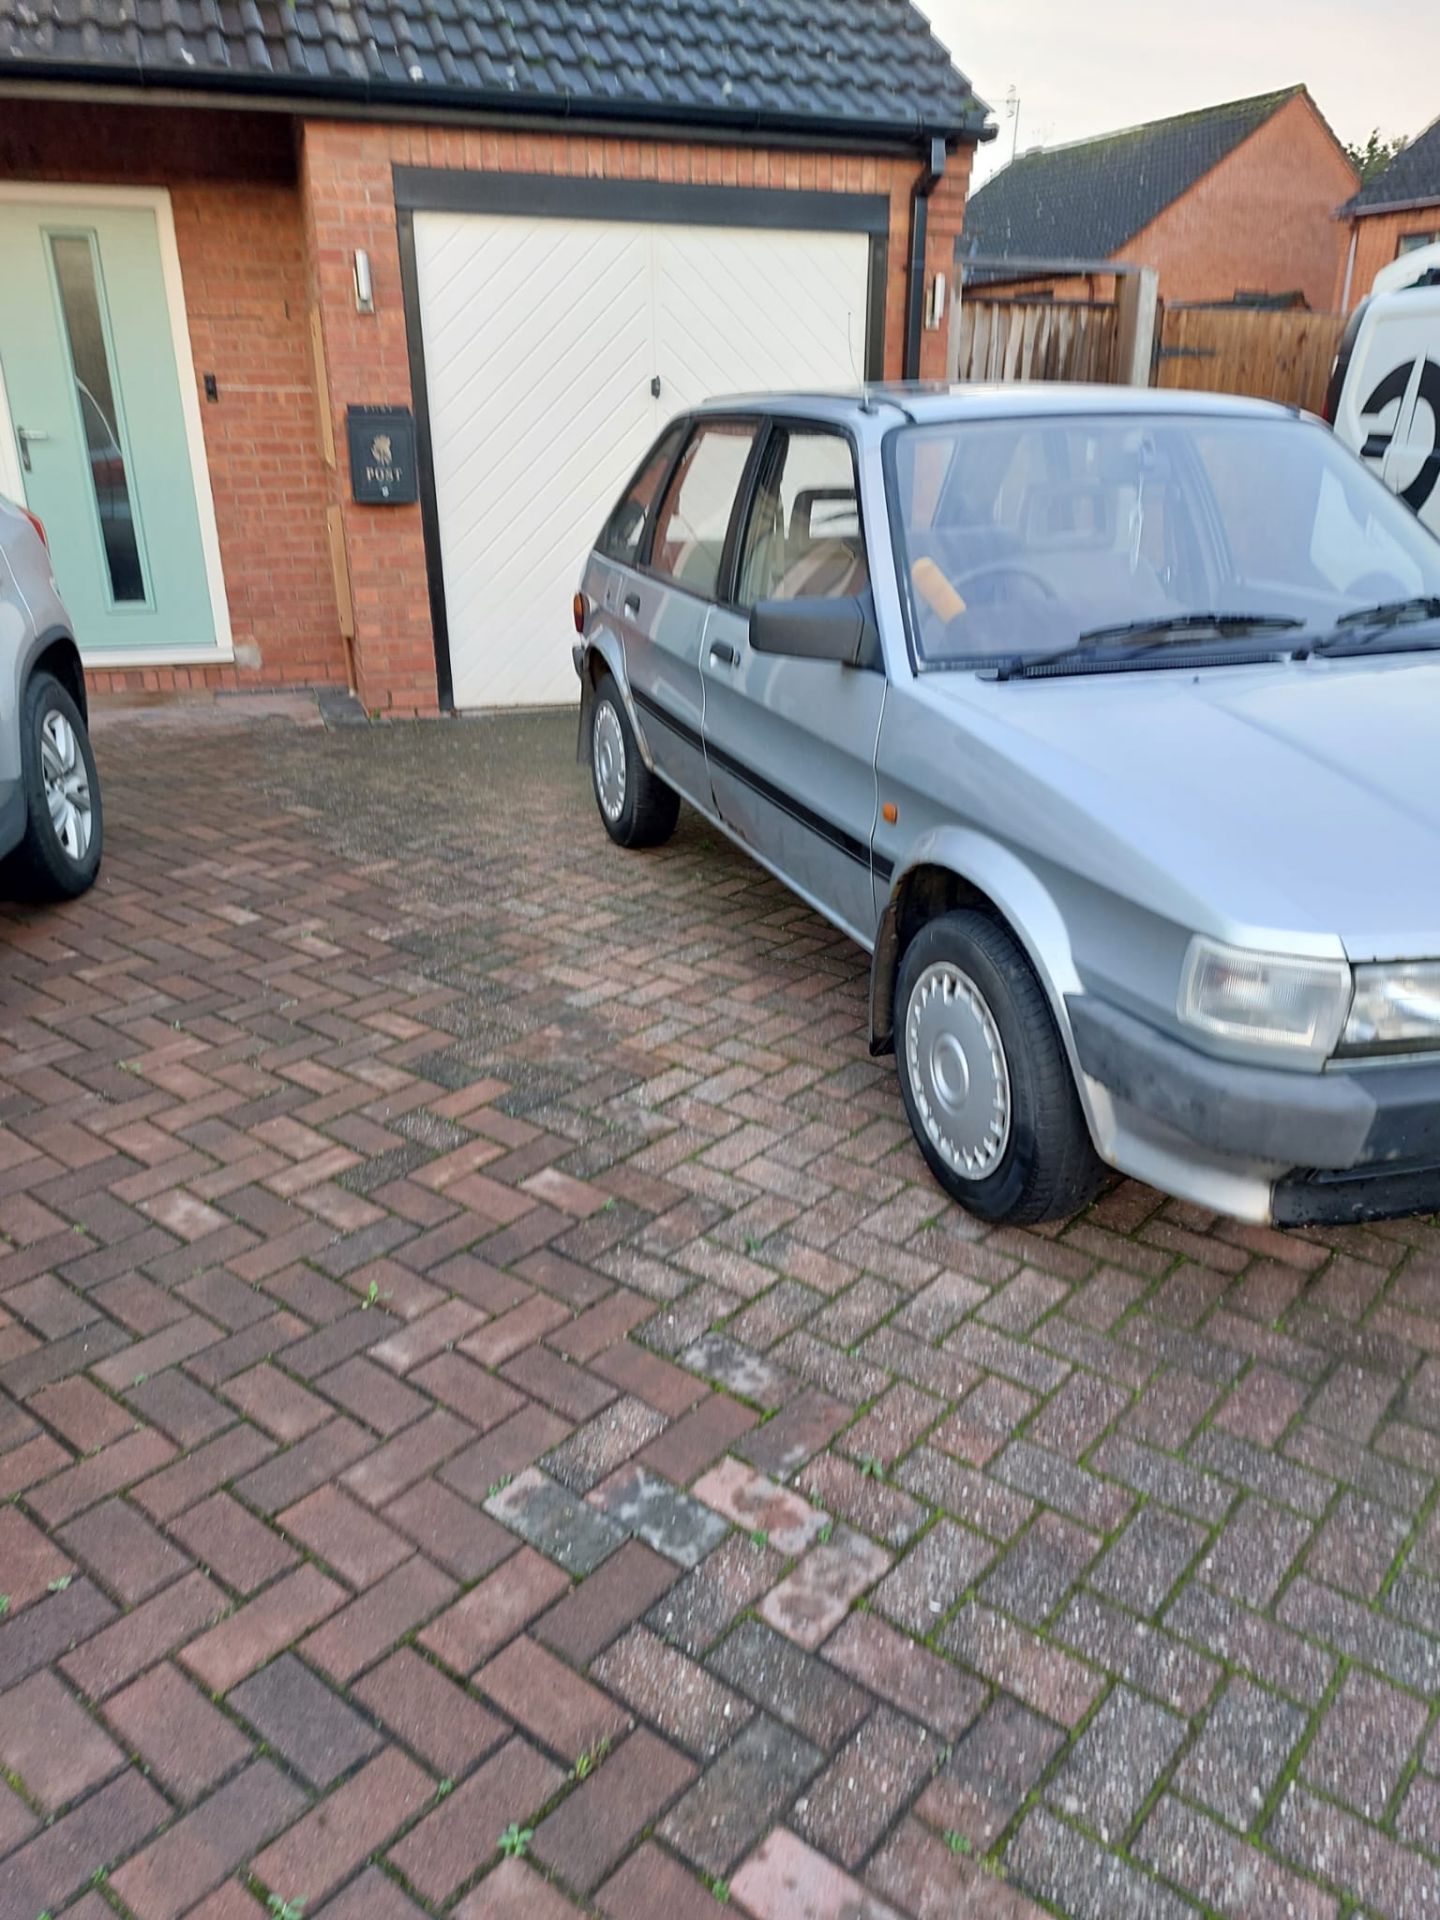 CLASSIC ROVER MAESTRO CLUBMAN D1993 WITH A 2.0L DIESEL TURBO ENGINE - 58K MILES (NO VAT ON HAMMER) - Image 10 of 12